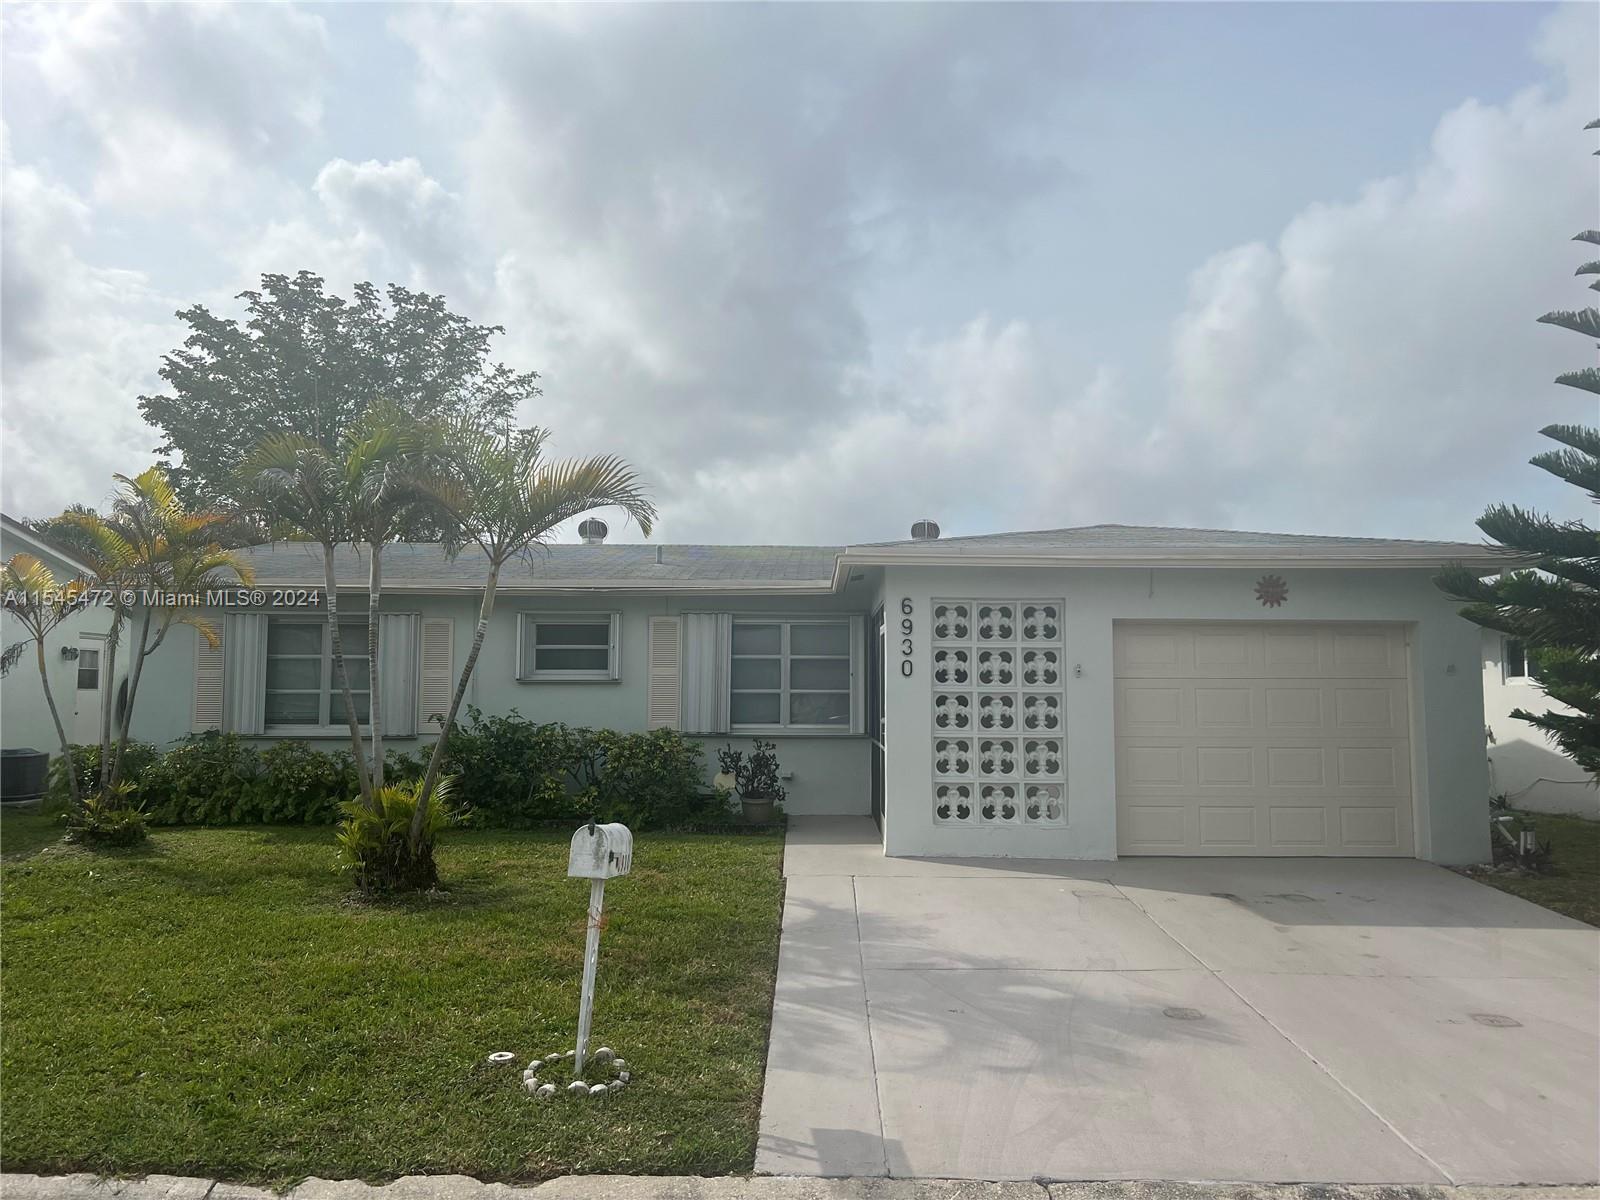 6930 NW 11th Ct, Margate, Florida 33063, 2 Bedrooms Bedrooms, ,2 BathroomsBathrooms,Residentiallease,For Rent,6930 NW 11th Ct,A11545472